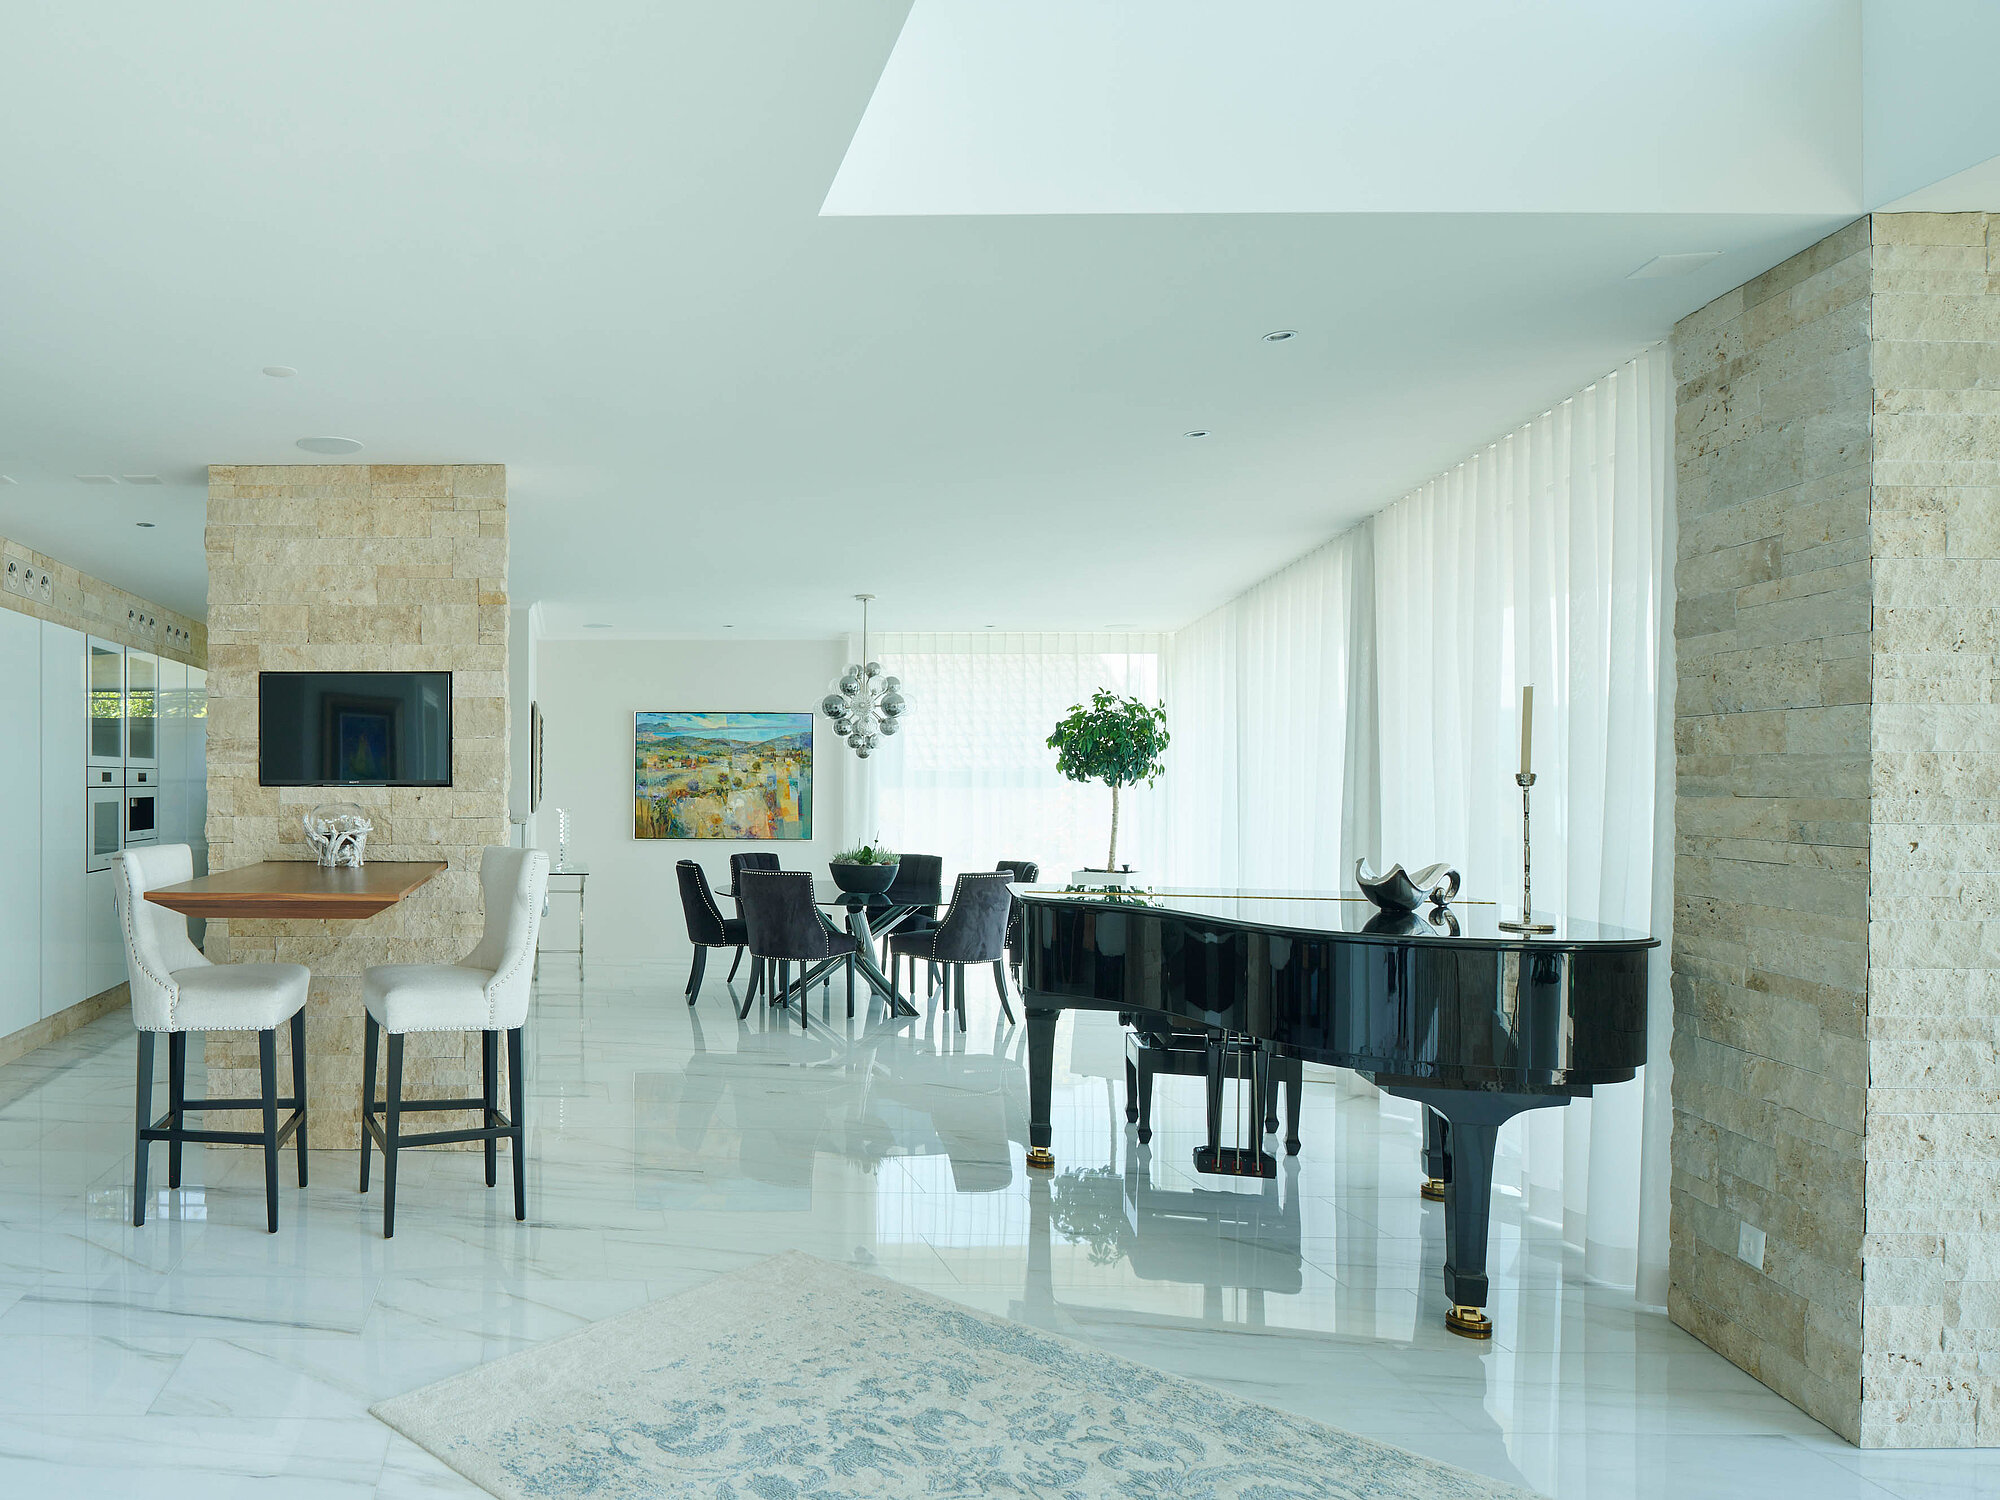 Interior view of the DOLCE VITA detached house, dining area